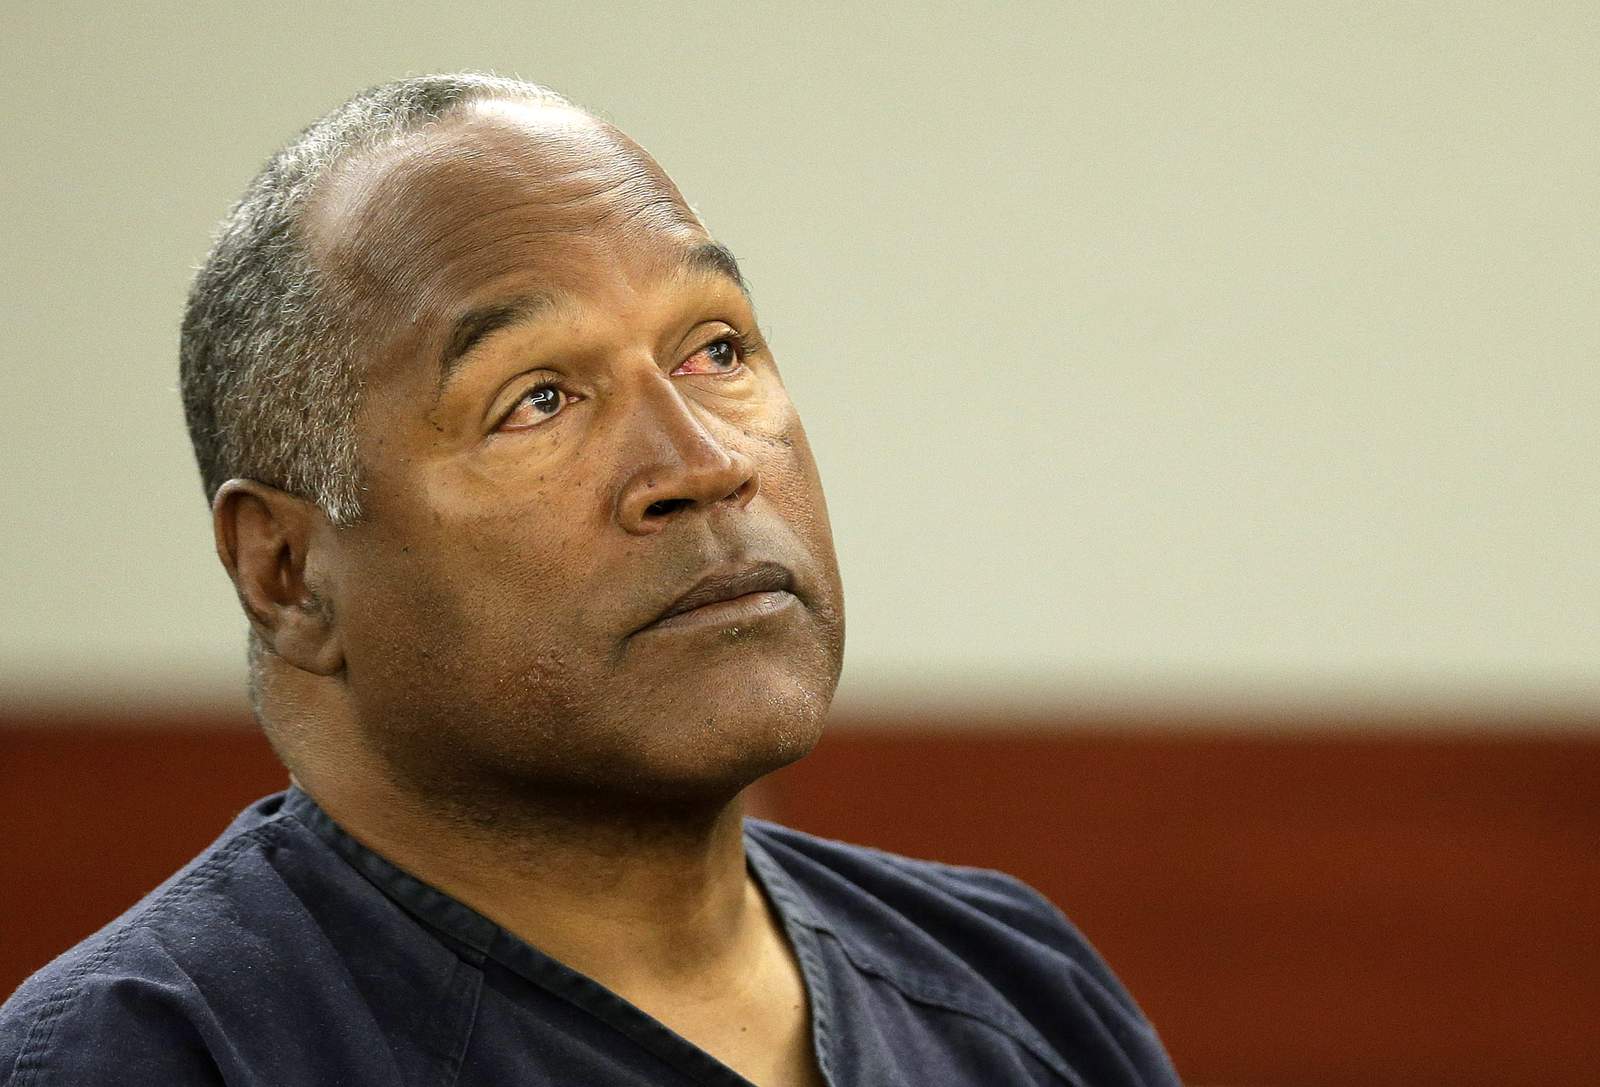 Welp, now O.J. Simpson thinks Carole Baskin from ‘Tiger King’ killed her husband